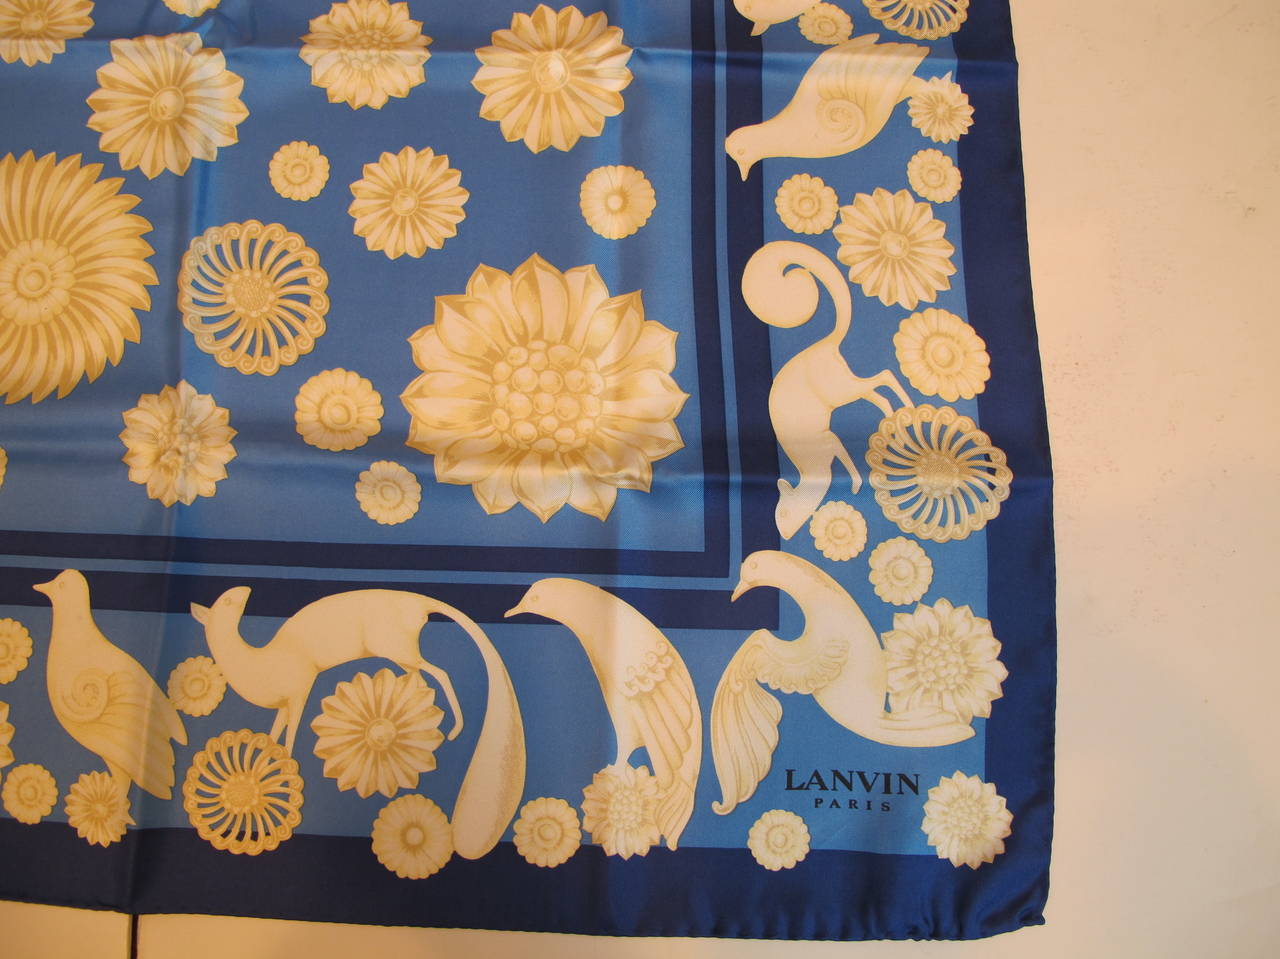 New . Vintage Lanvin Paris Silk Twill Scarf enhanced by Bird, Squirrel and Medallion motif. The colors of sapphire and azure blues give birth to an exciting scarf.